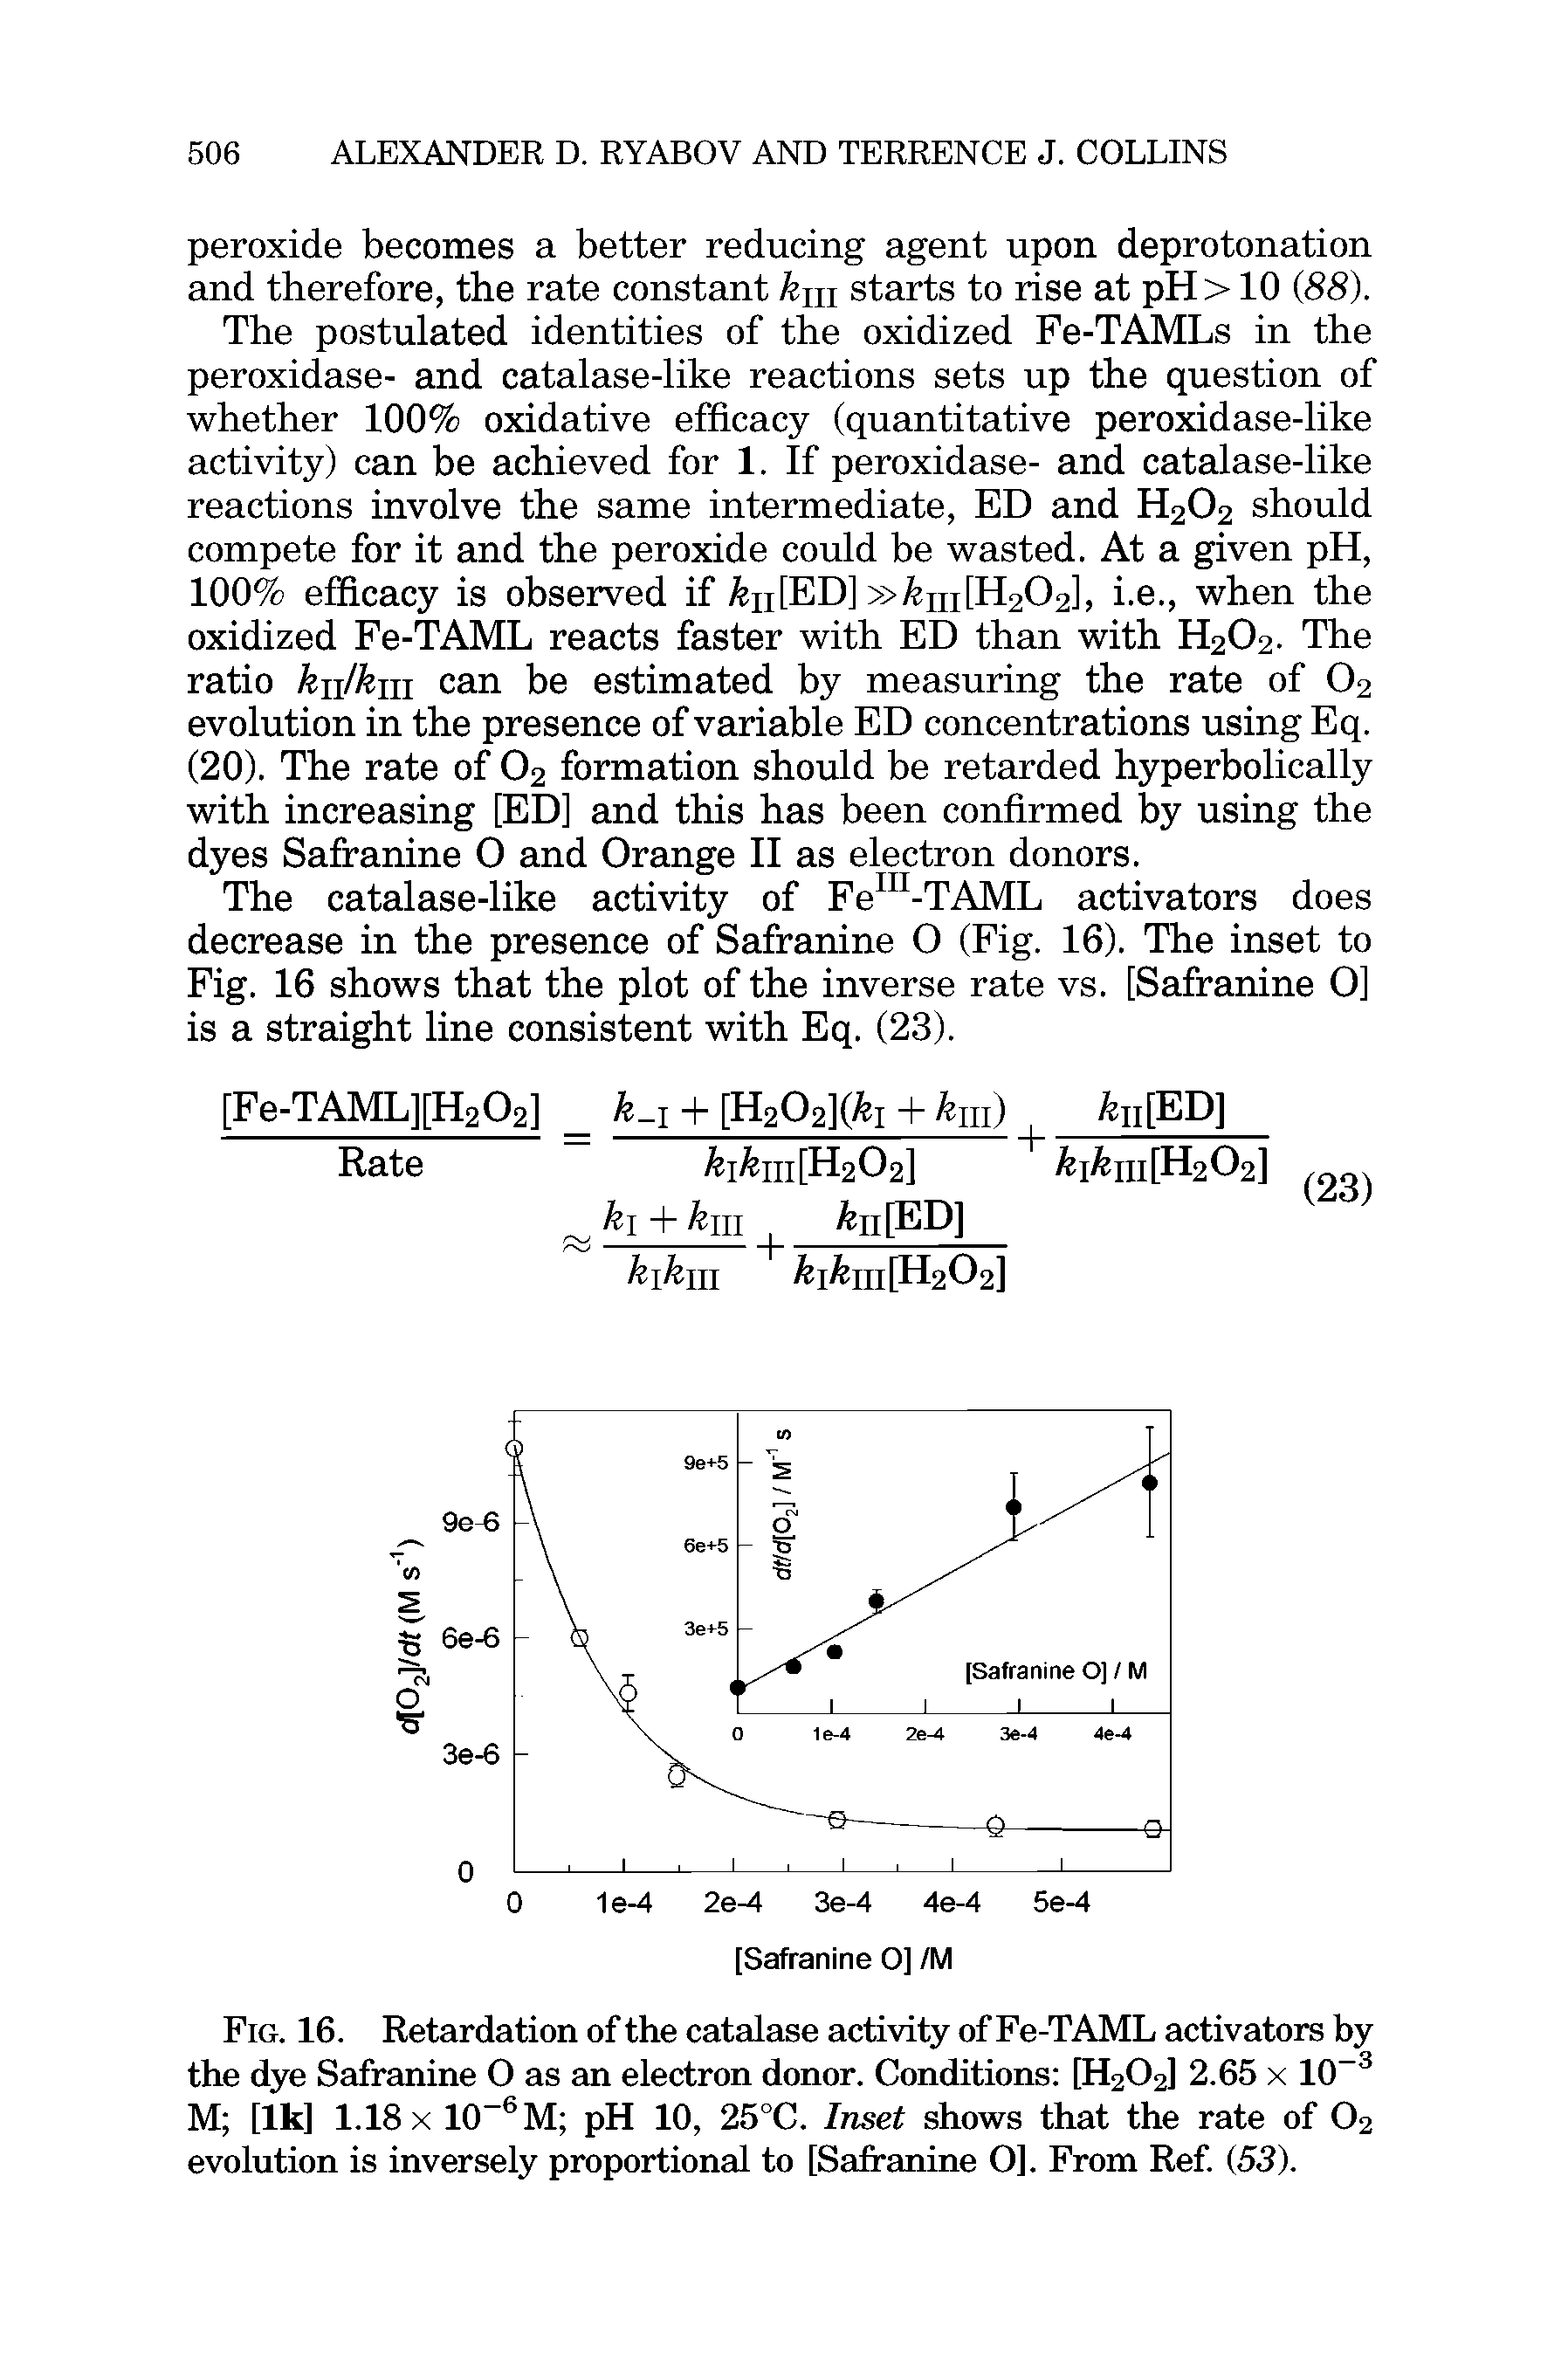 Fig. 16. Retardation of the catalase activity of Fe-TAML activators by the dye Safranine O as an electron donor. Conditions [H202] 2.65 x 10-3 M [lk] 1.18 x 10 6M pH 10, 25°C. Inset shows that the rate of 02 evolution is inversely proportional to [Safranine O]. From Ref. (53).